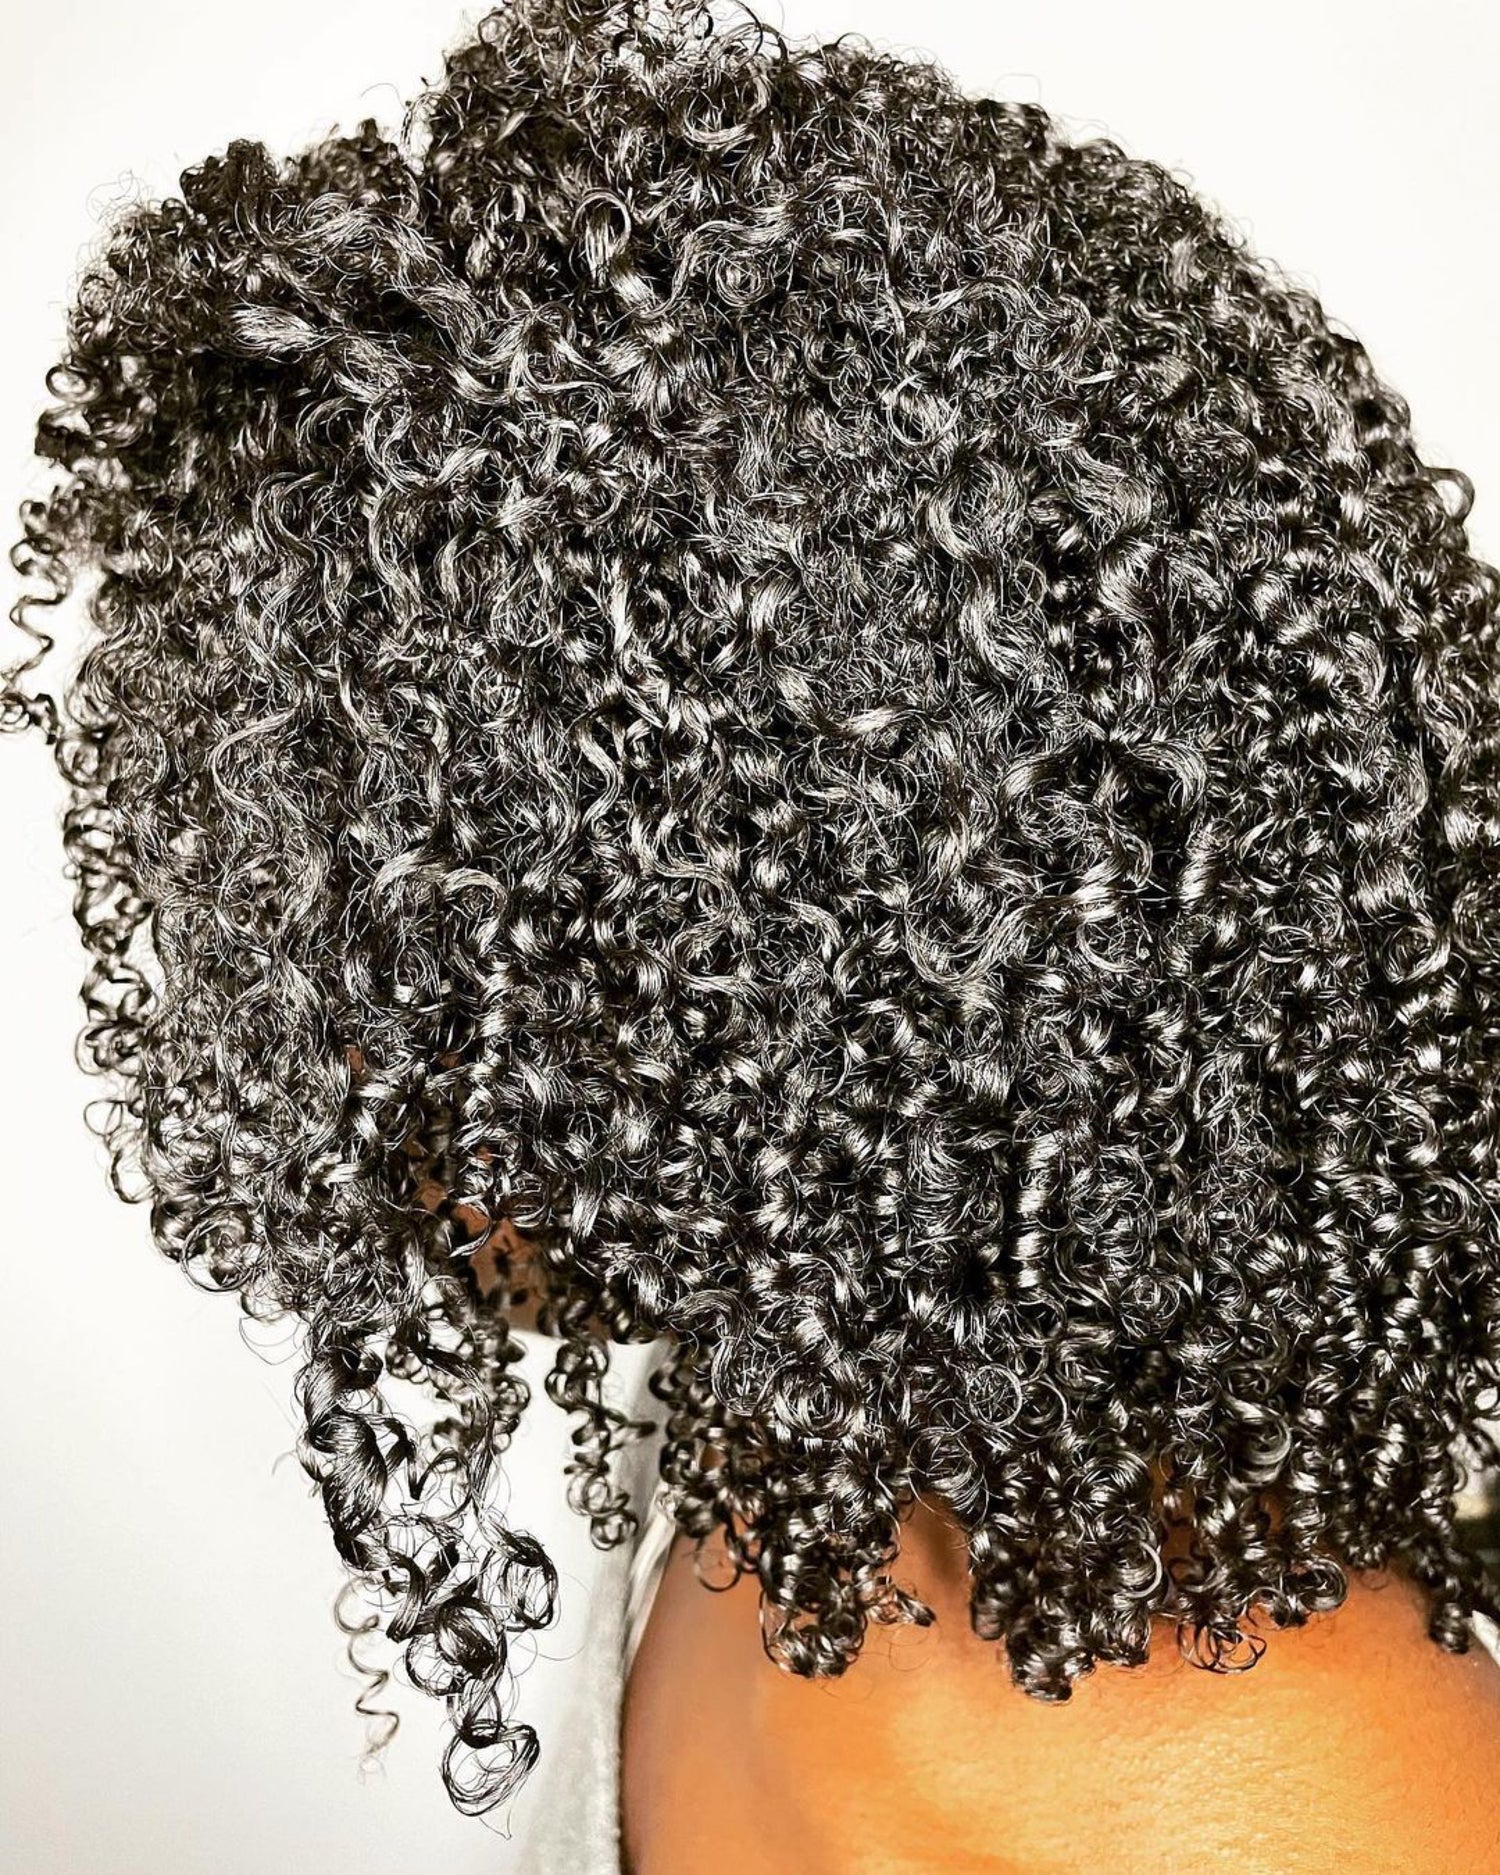 Help! My Natural Hair is Shedding: 3 Must-Know Reasons Why